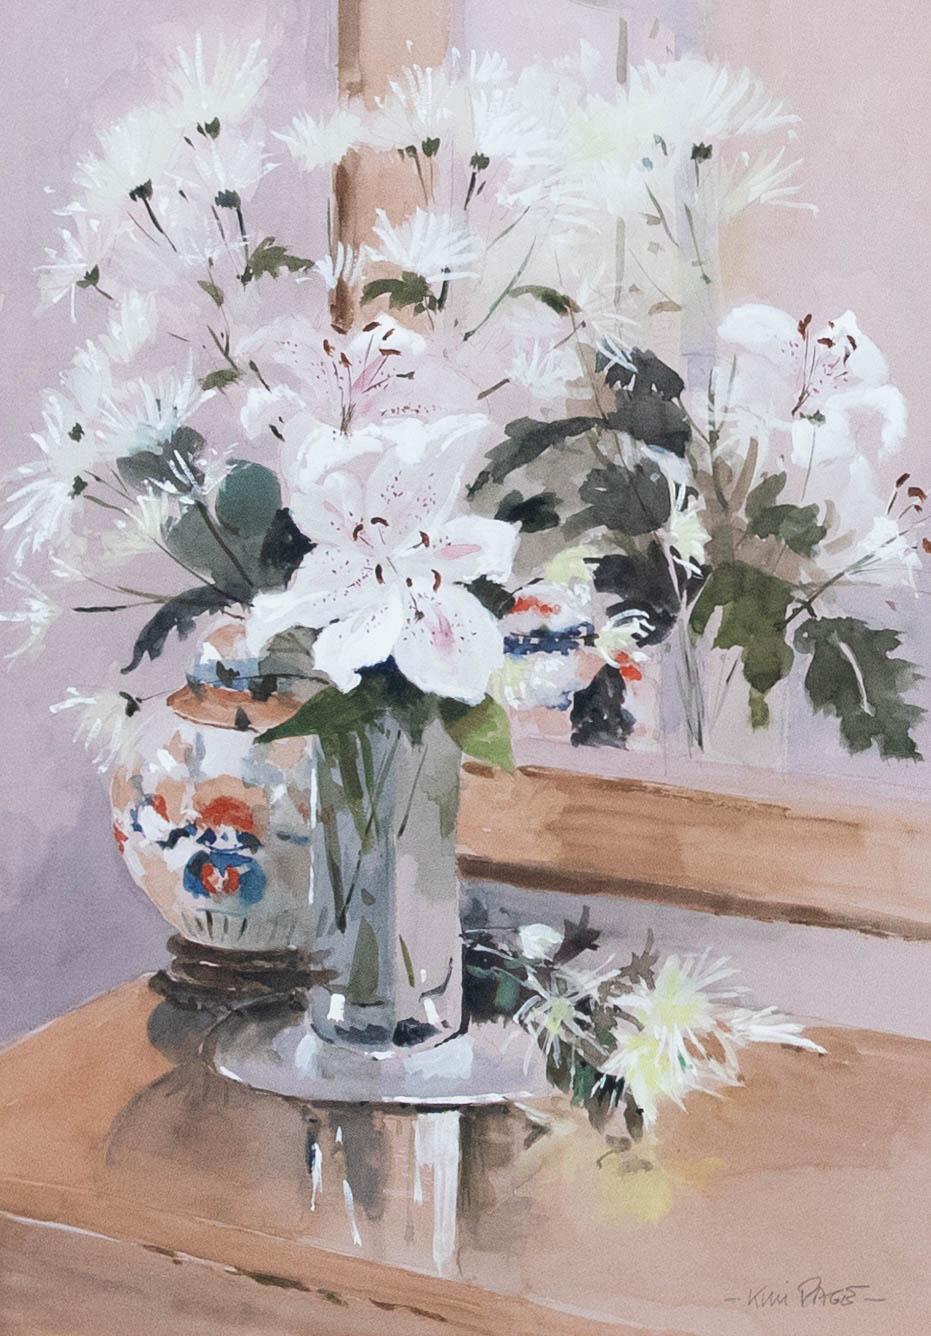 Kim Page - Framed Contemporary Watercolour, Still Life of White Lilies - Art by Unknown